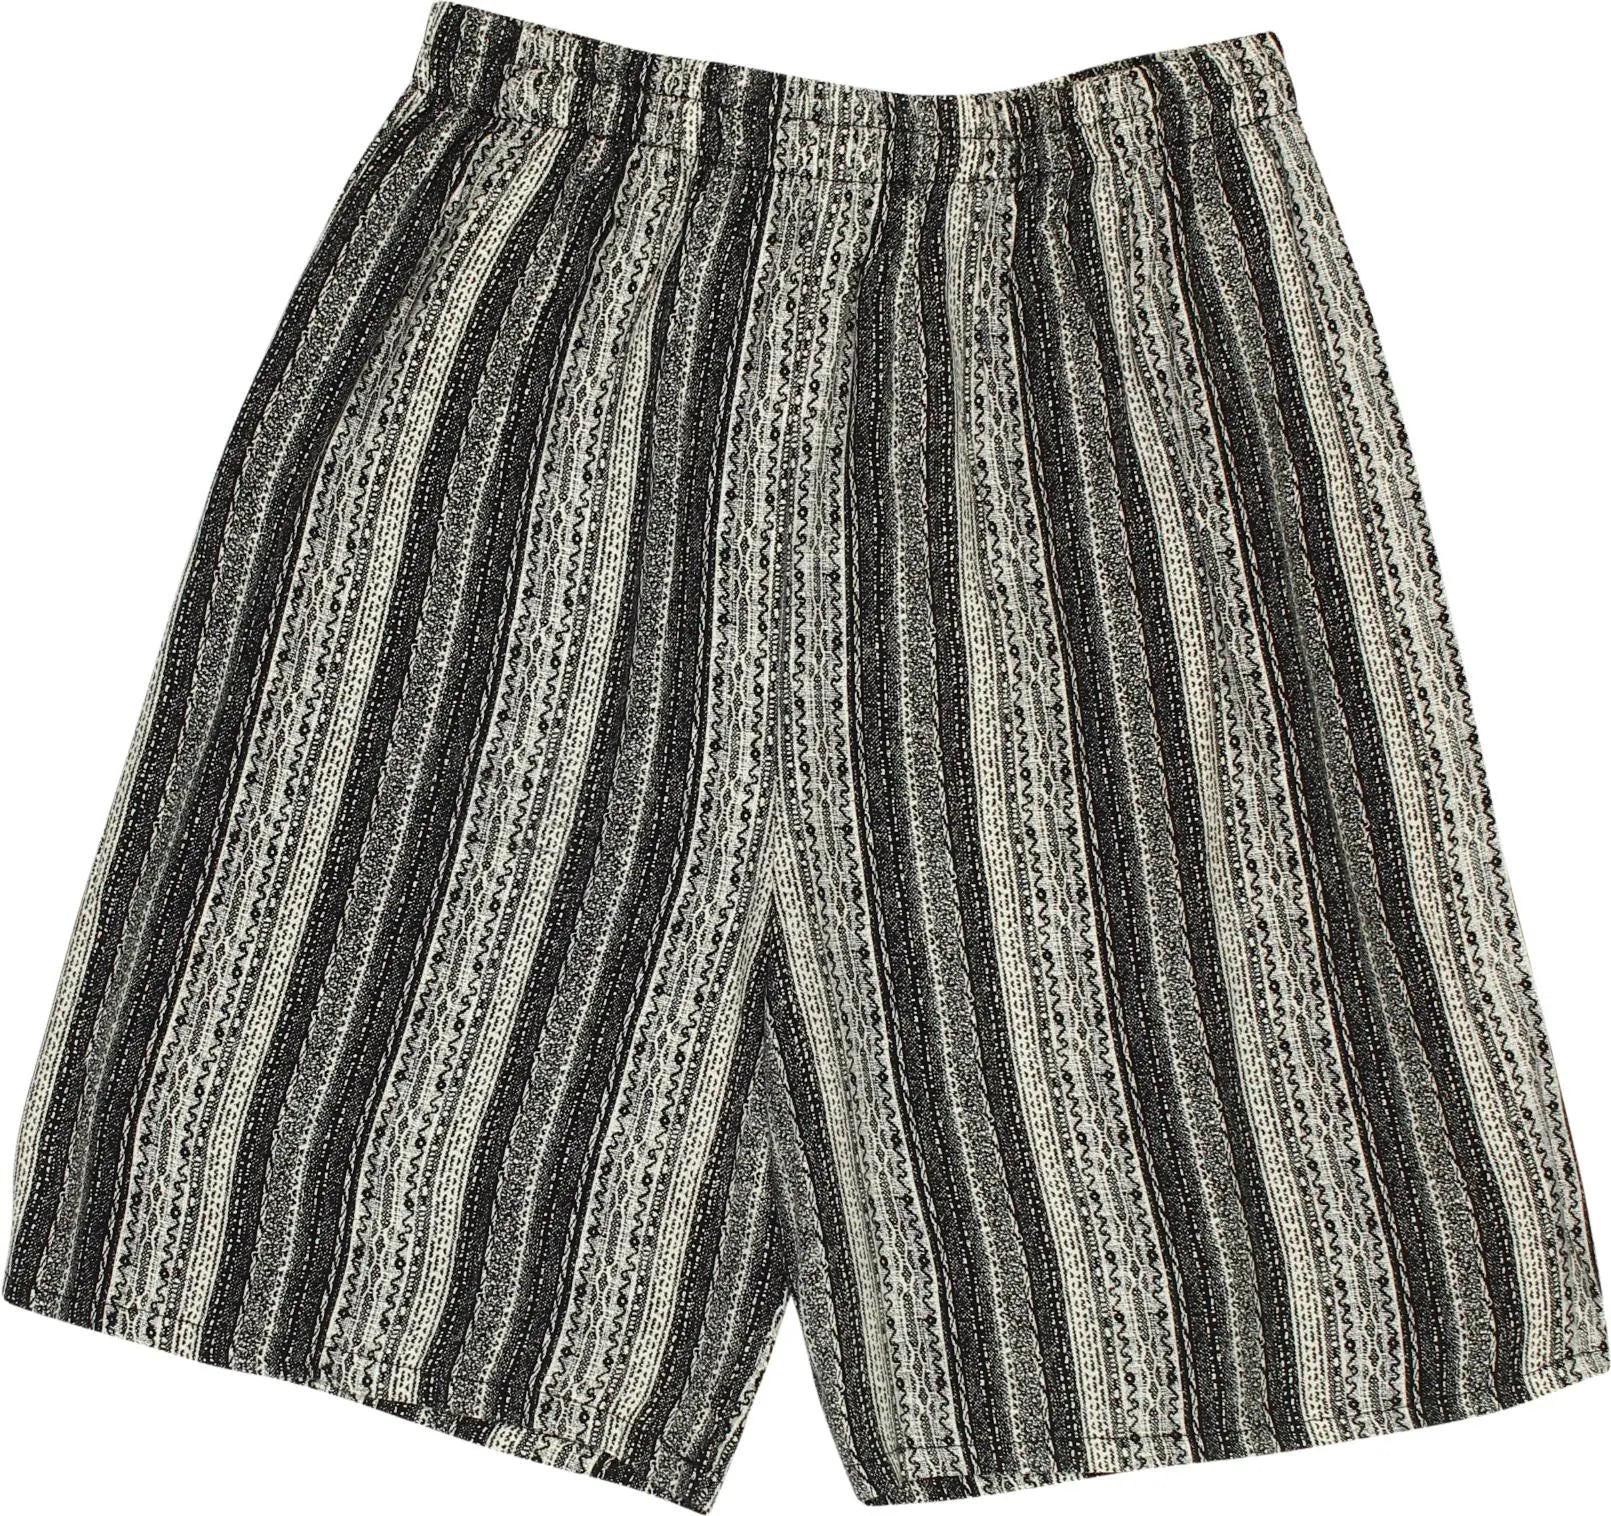 Unknown - Patterned Shorts- ThriftTale.com - Vintage and second handclothing